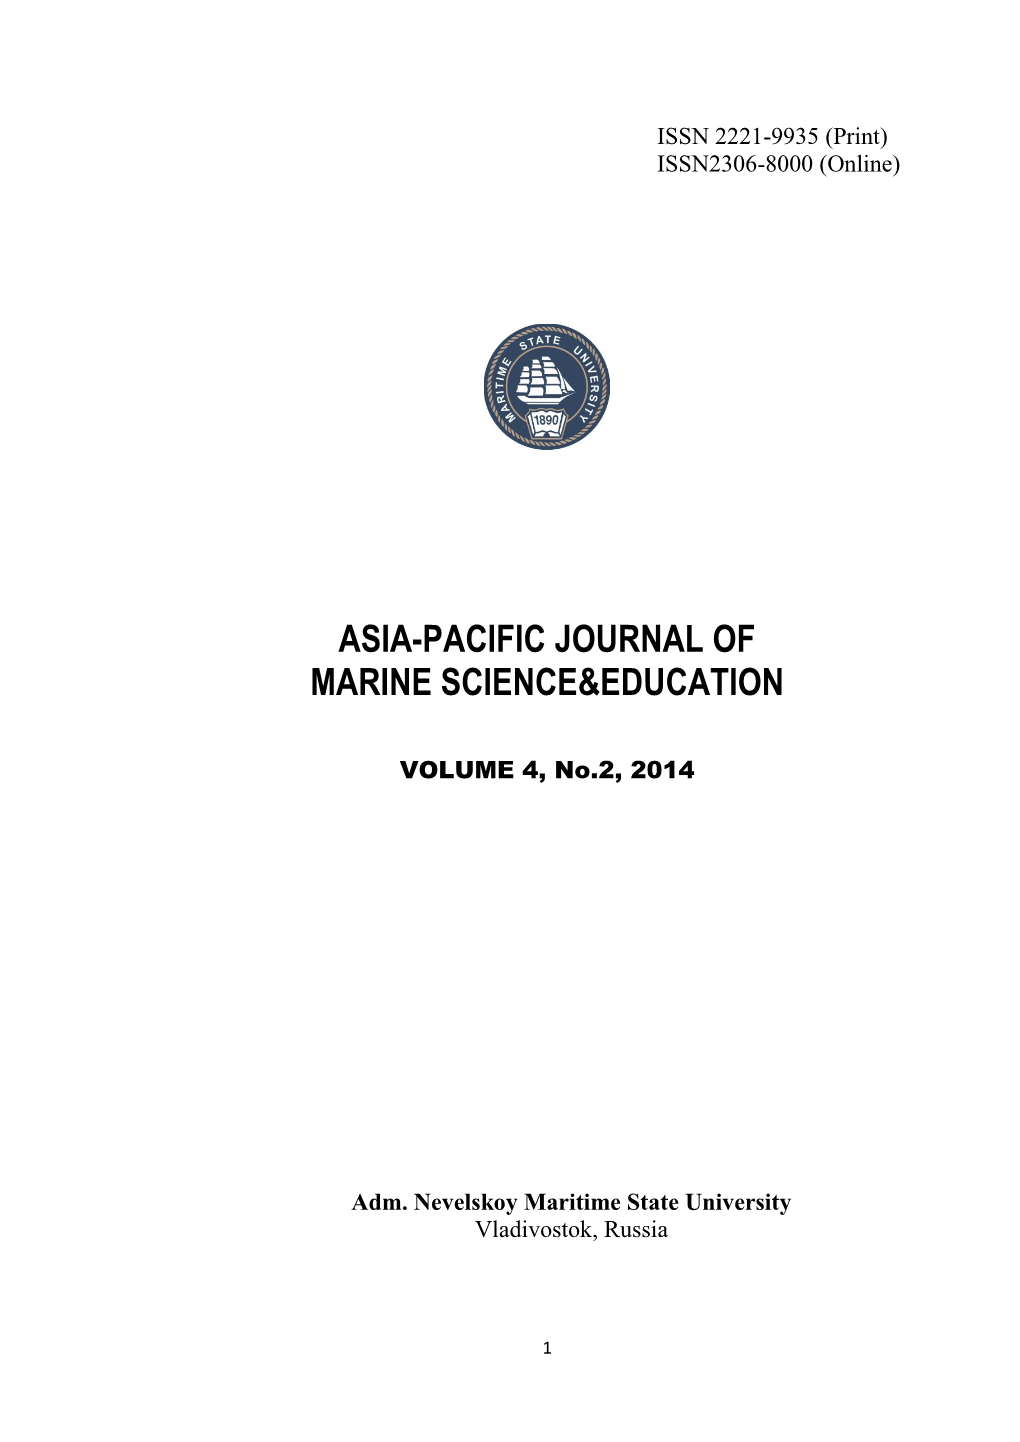 Asia-Pacific Journal of Marine Science&Education